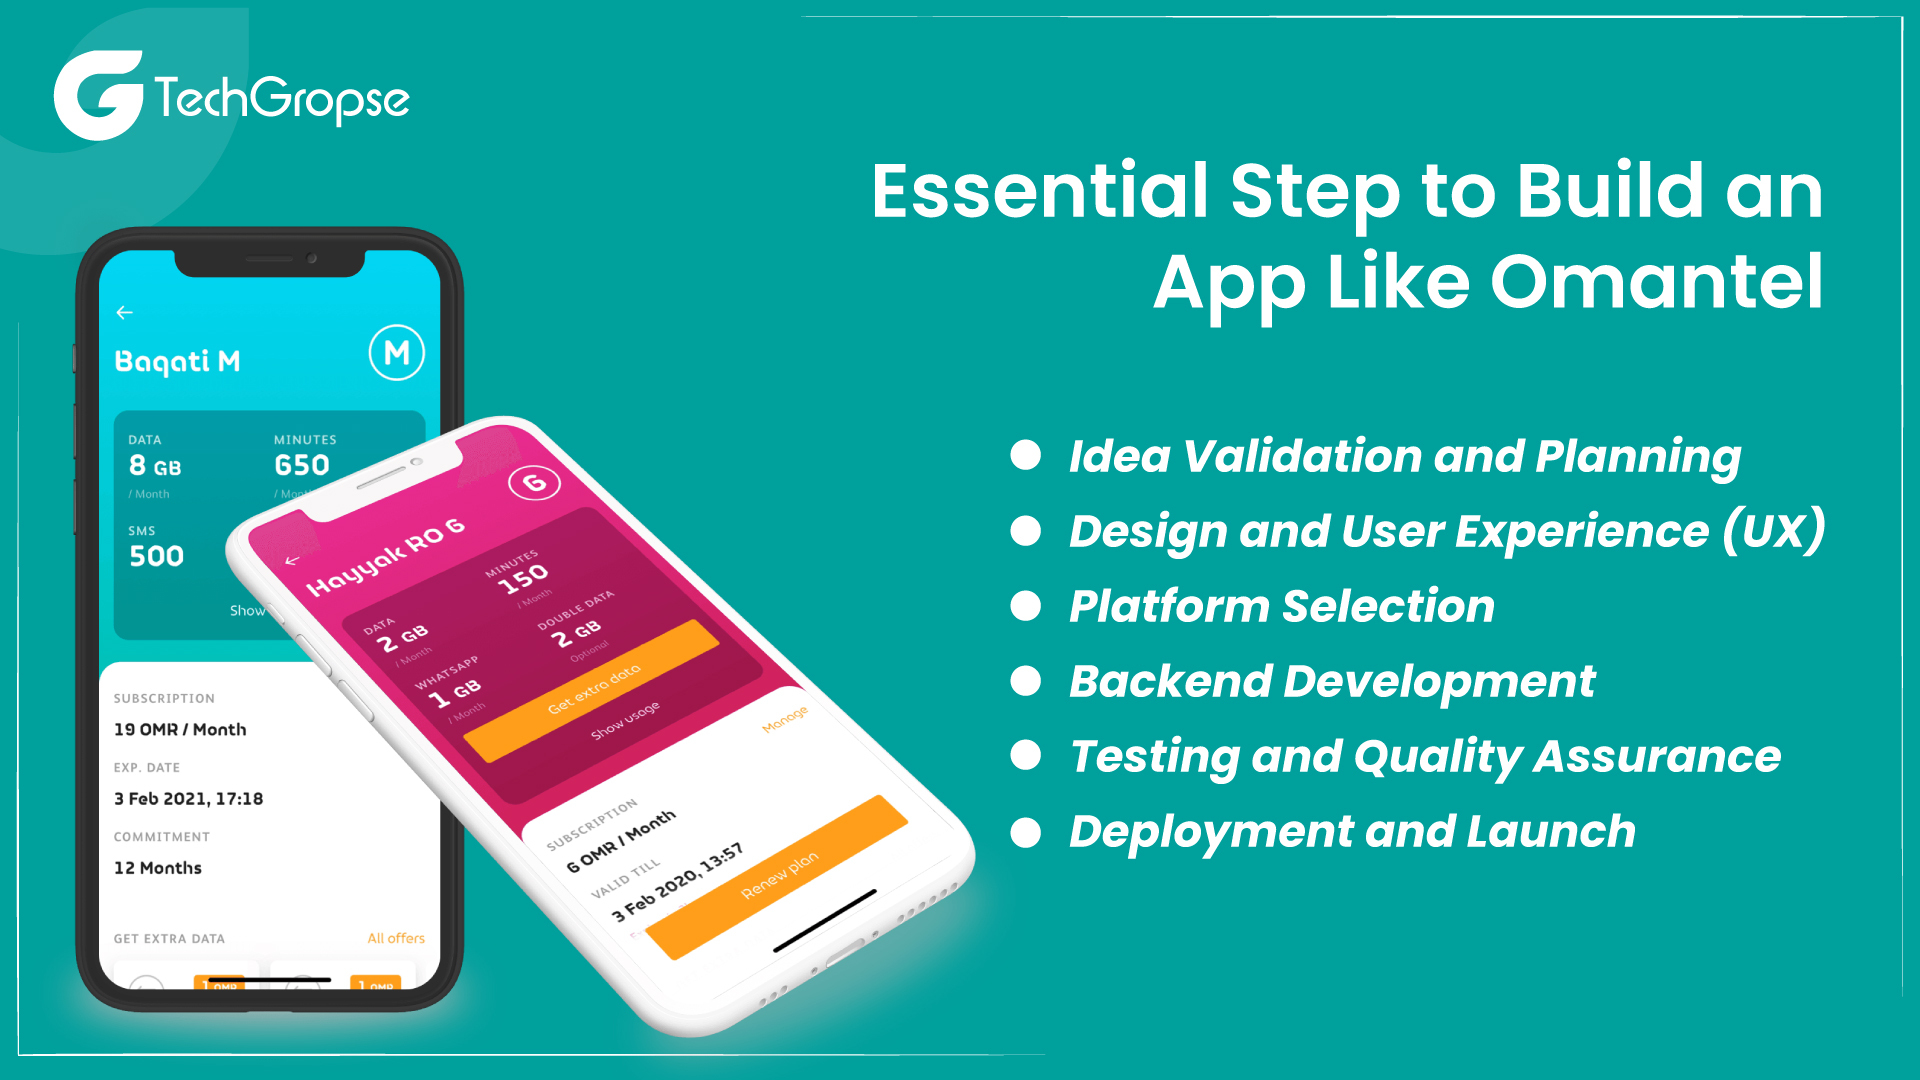 Essential Step to Build an App Like Omantel